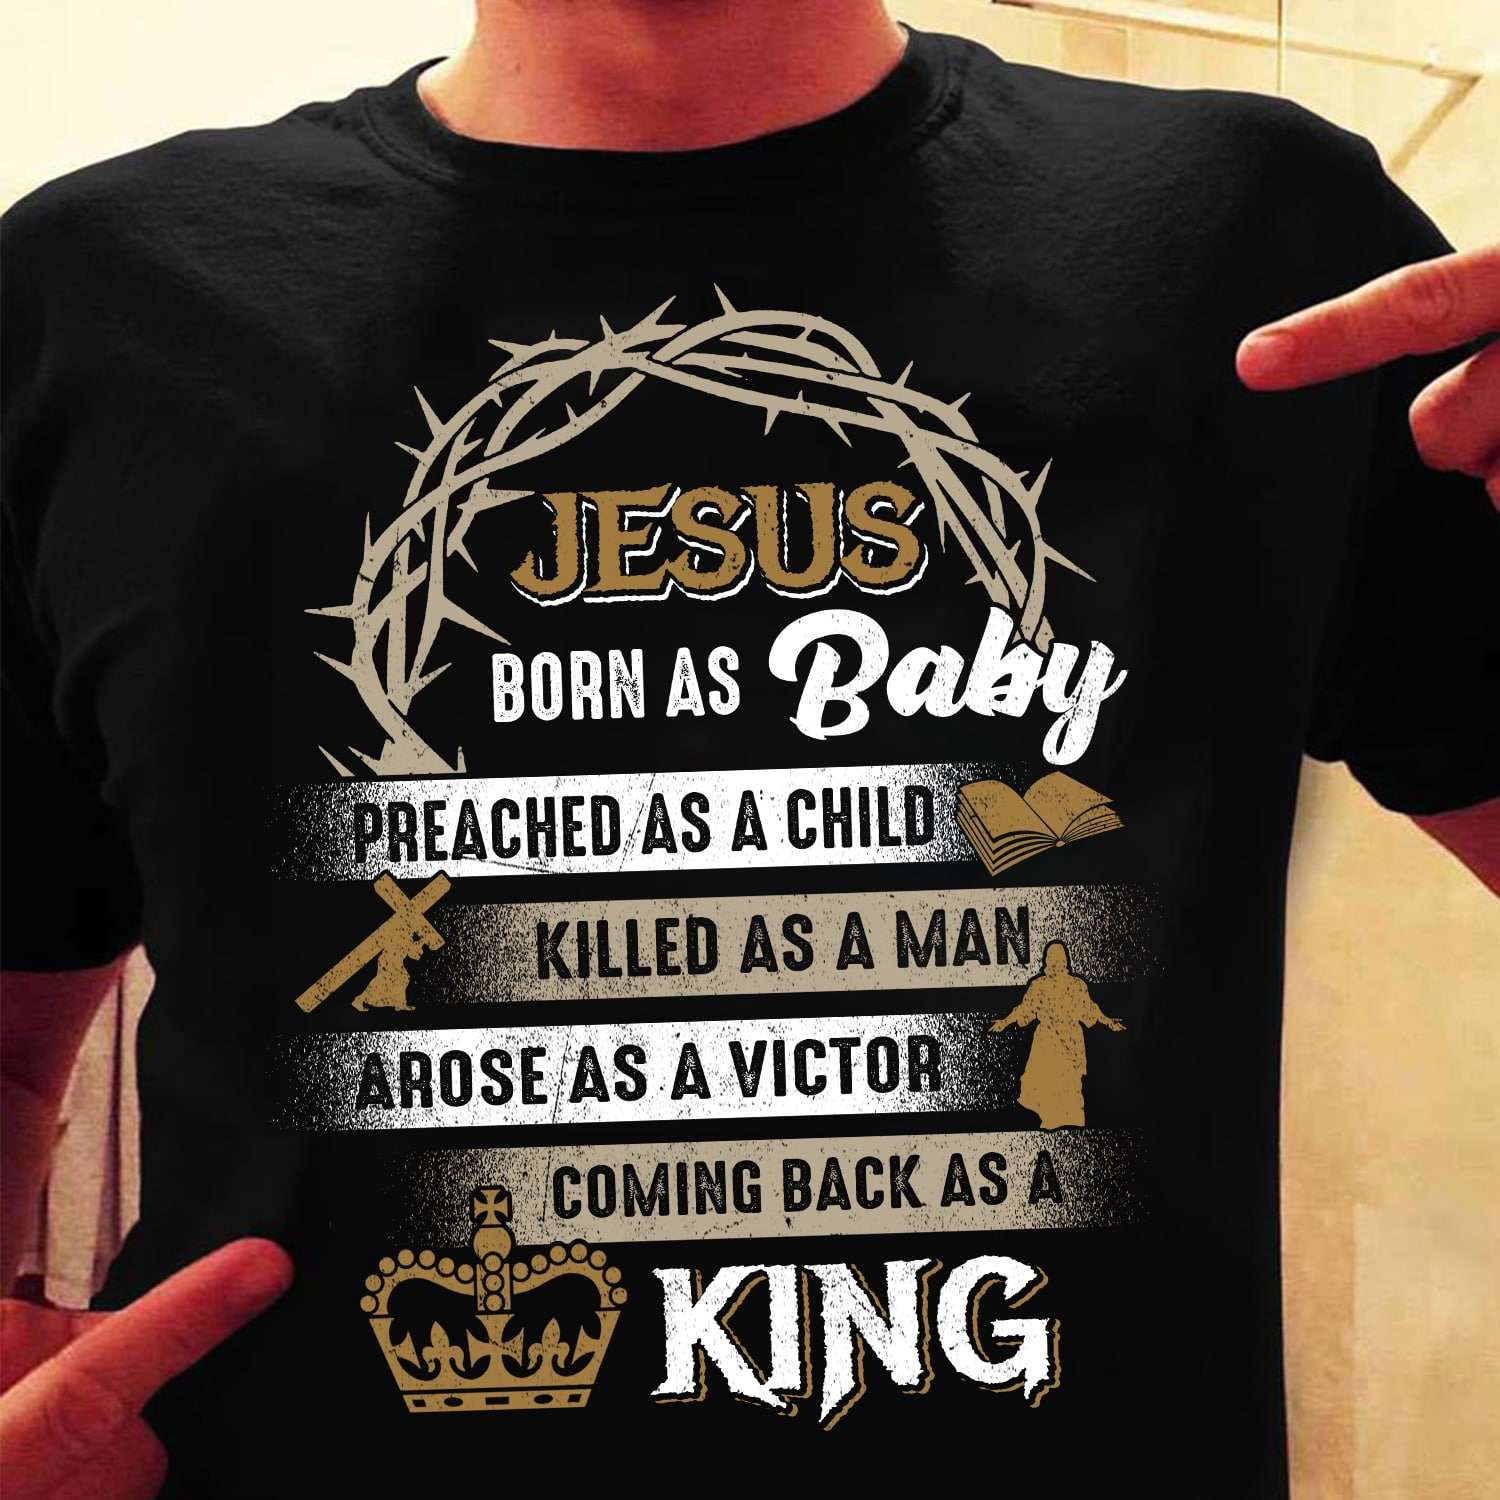 Jesus born as baby, preached as a child, killed as a man, arose as a victor, coming back as a King - King crown